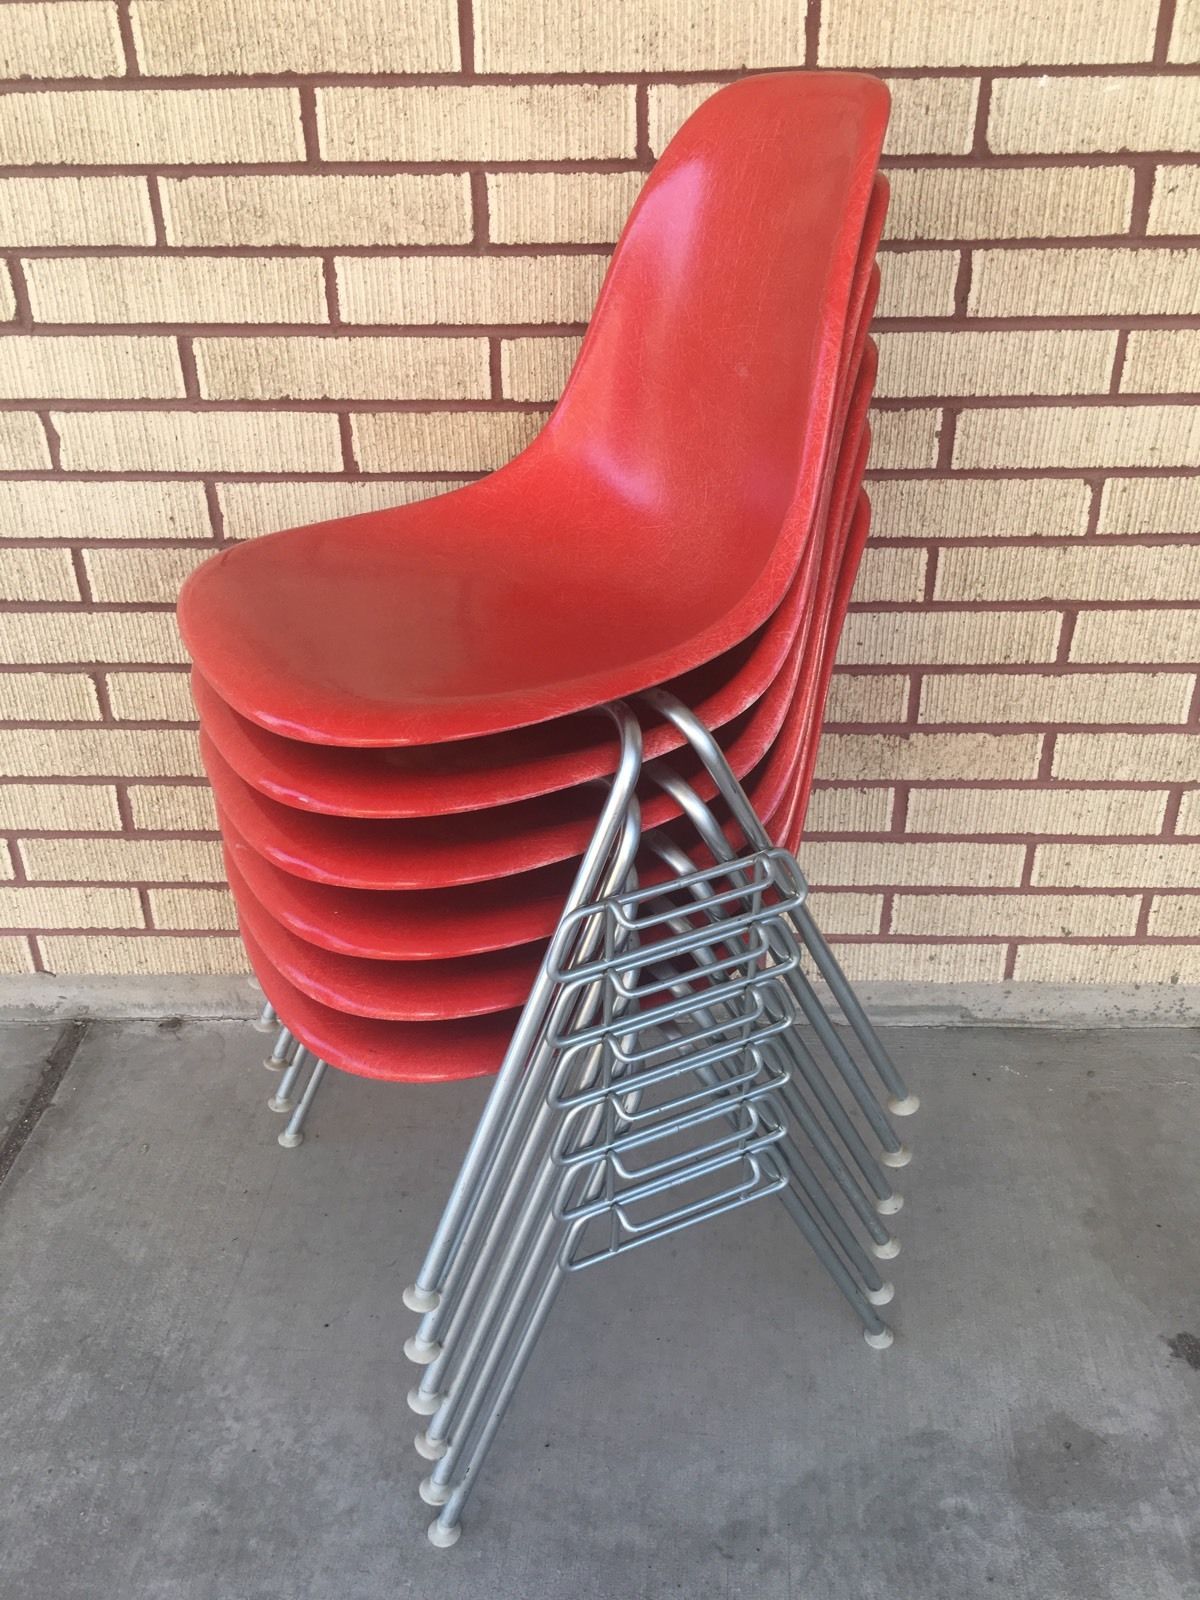 Original Red Herman Miller Fiberglass Side Shell Chair By Charles Eames